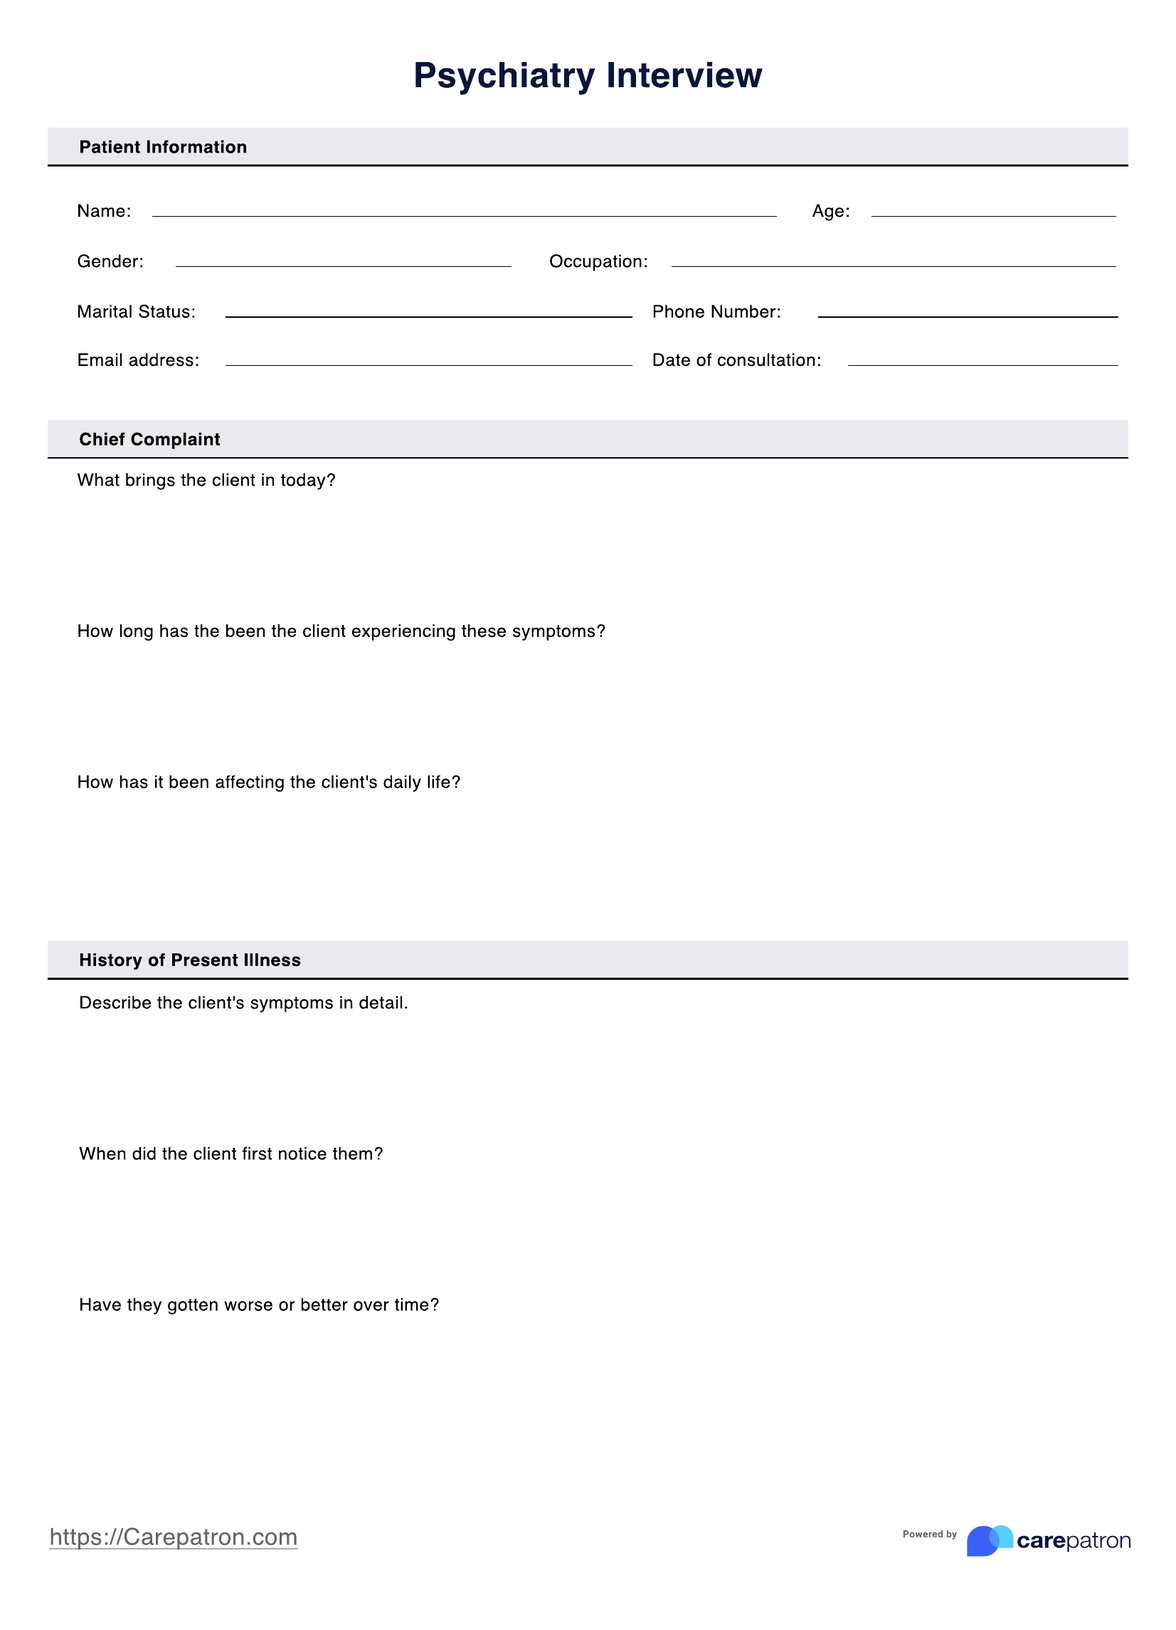 Psychiatry Interview Template PDF Example